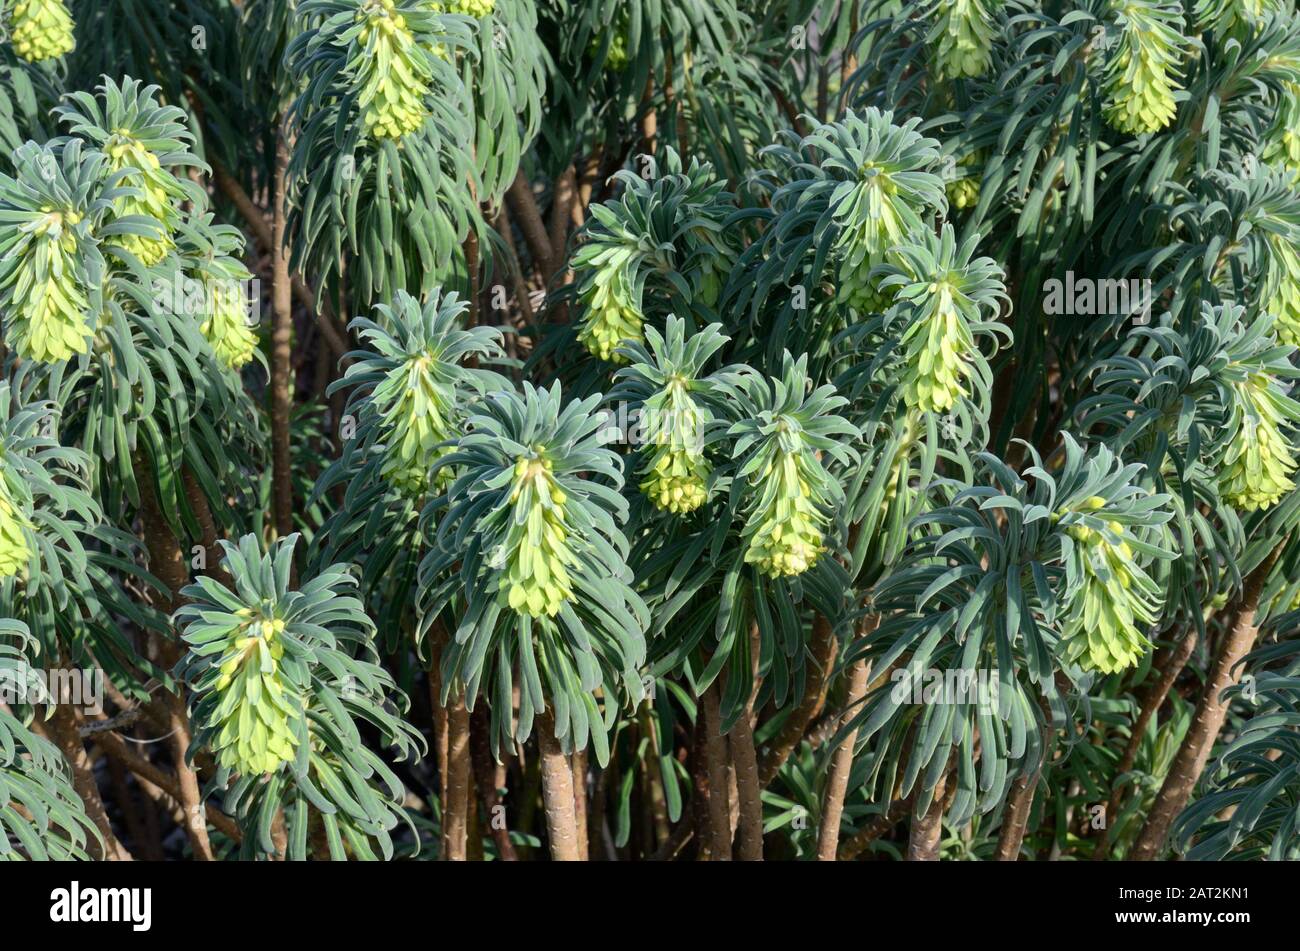 Euphorbia characias forestcate spurge evergreen perennial plant silver grey leaves spikes of yellow flowers Stock Photo